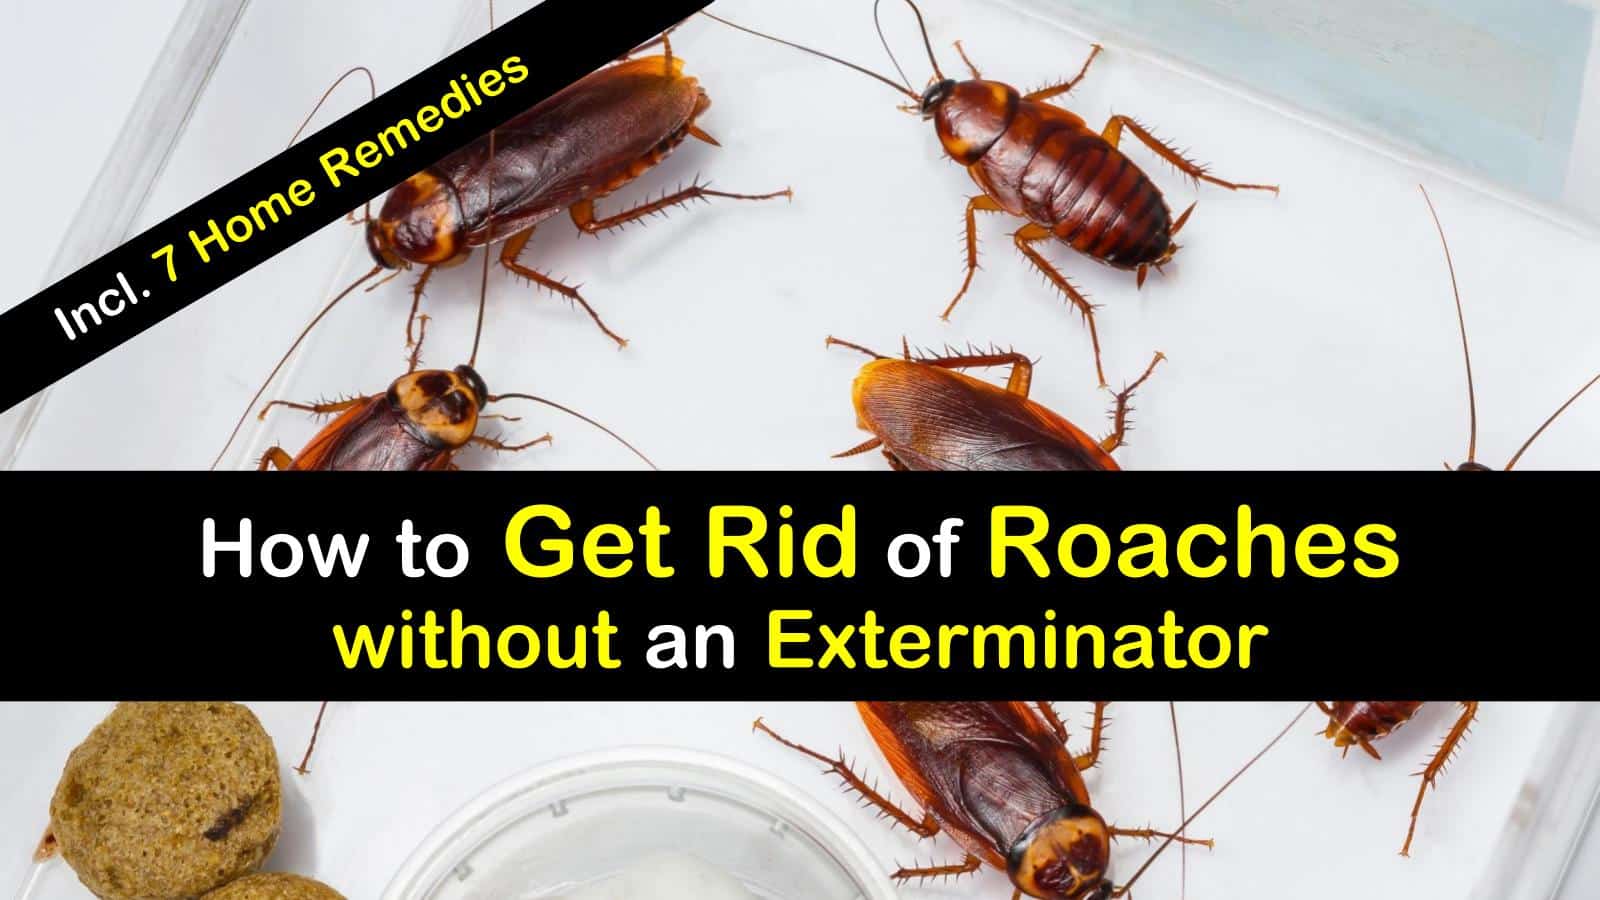 8 Super Simple Ways To Get Rid Of Roaches Without An Exterminator